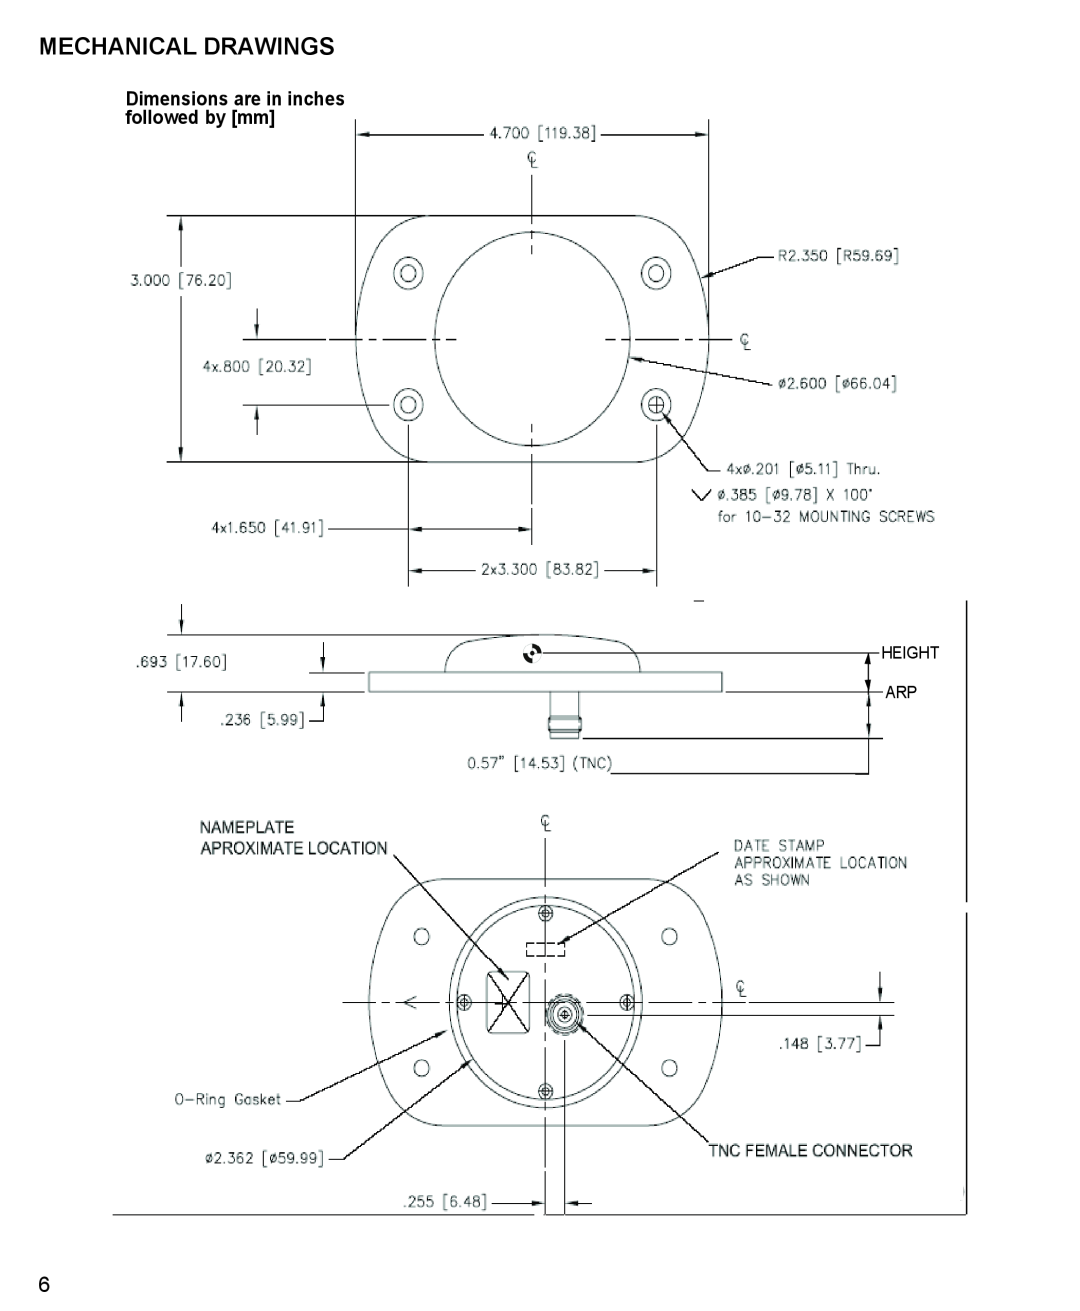 Novatel 42G1215A-XT-1 manual Mechanical Drawings, Dimensions are in inches followed by mm, Height Arp 